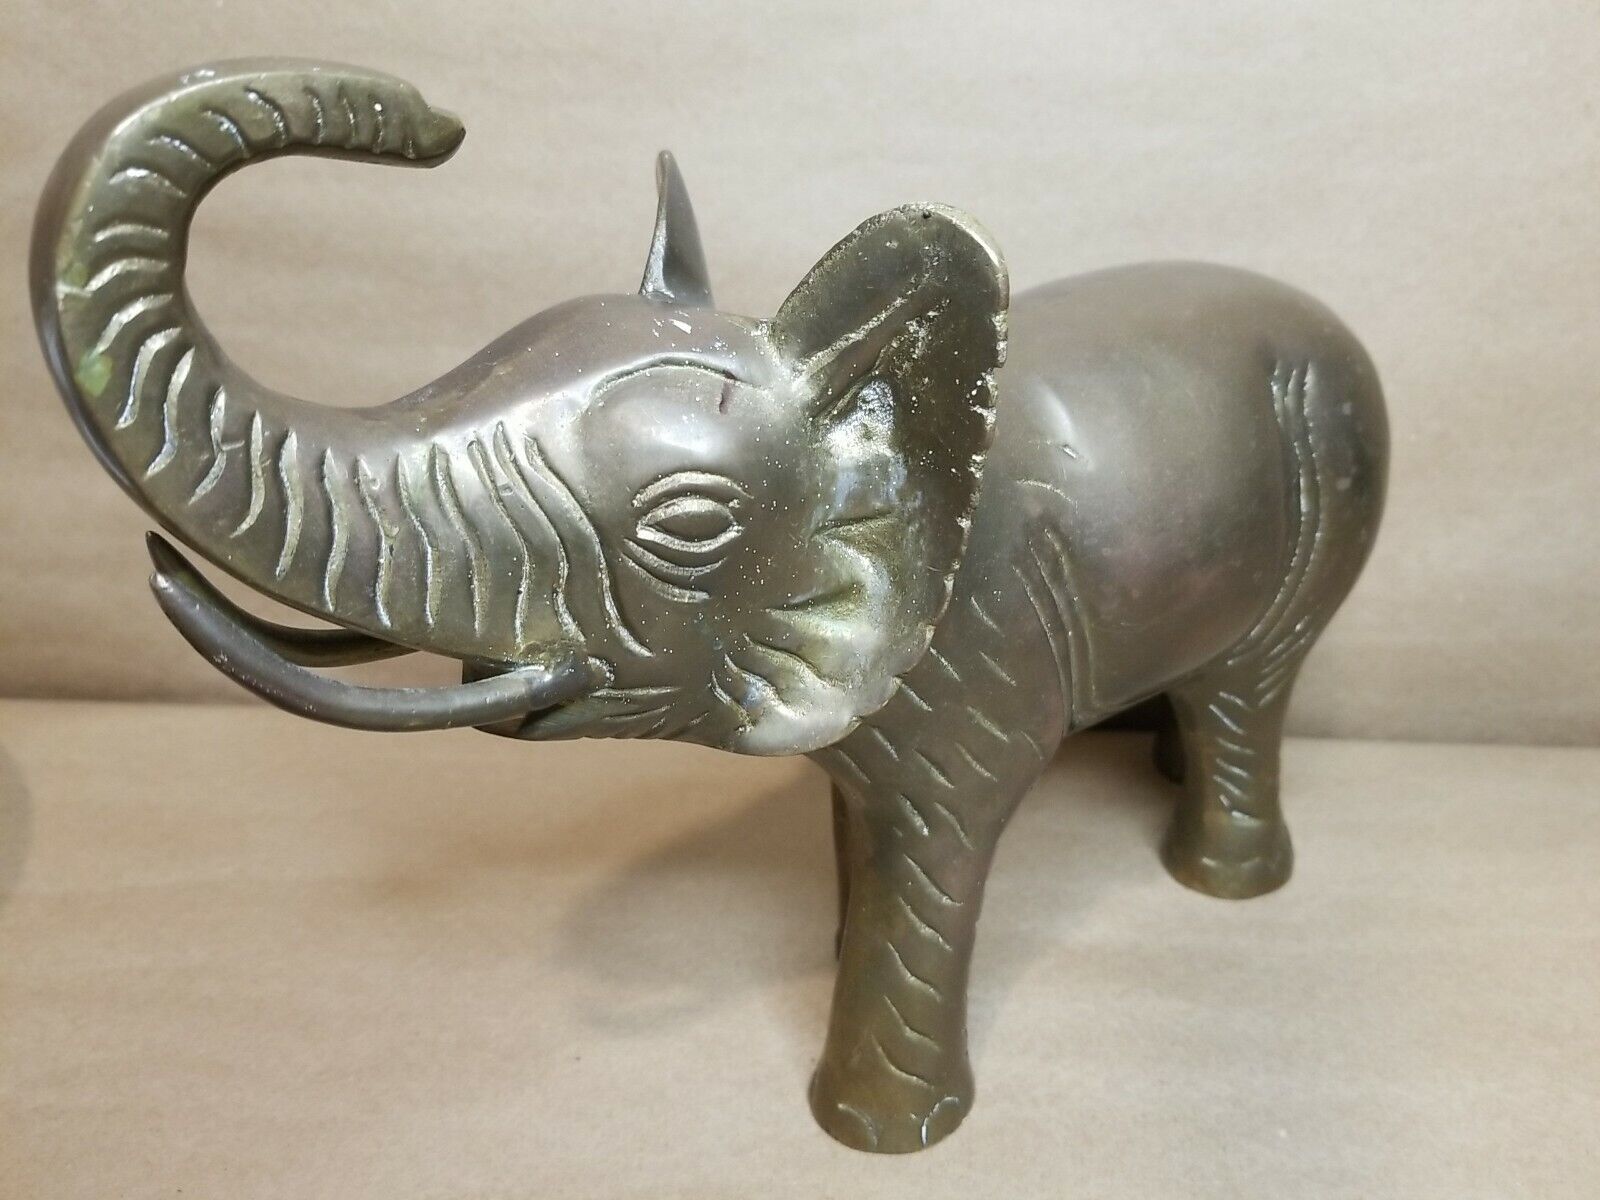 VTG Solid Brass Hand Crafted Elephant Statue Figure 